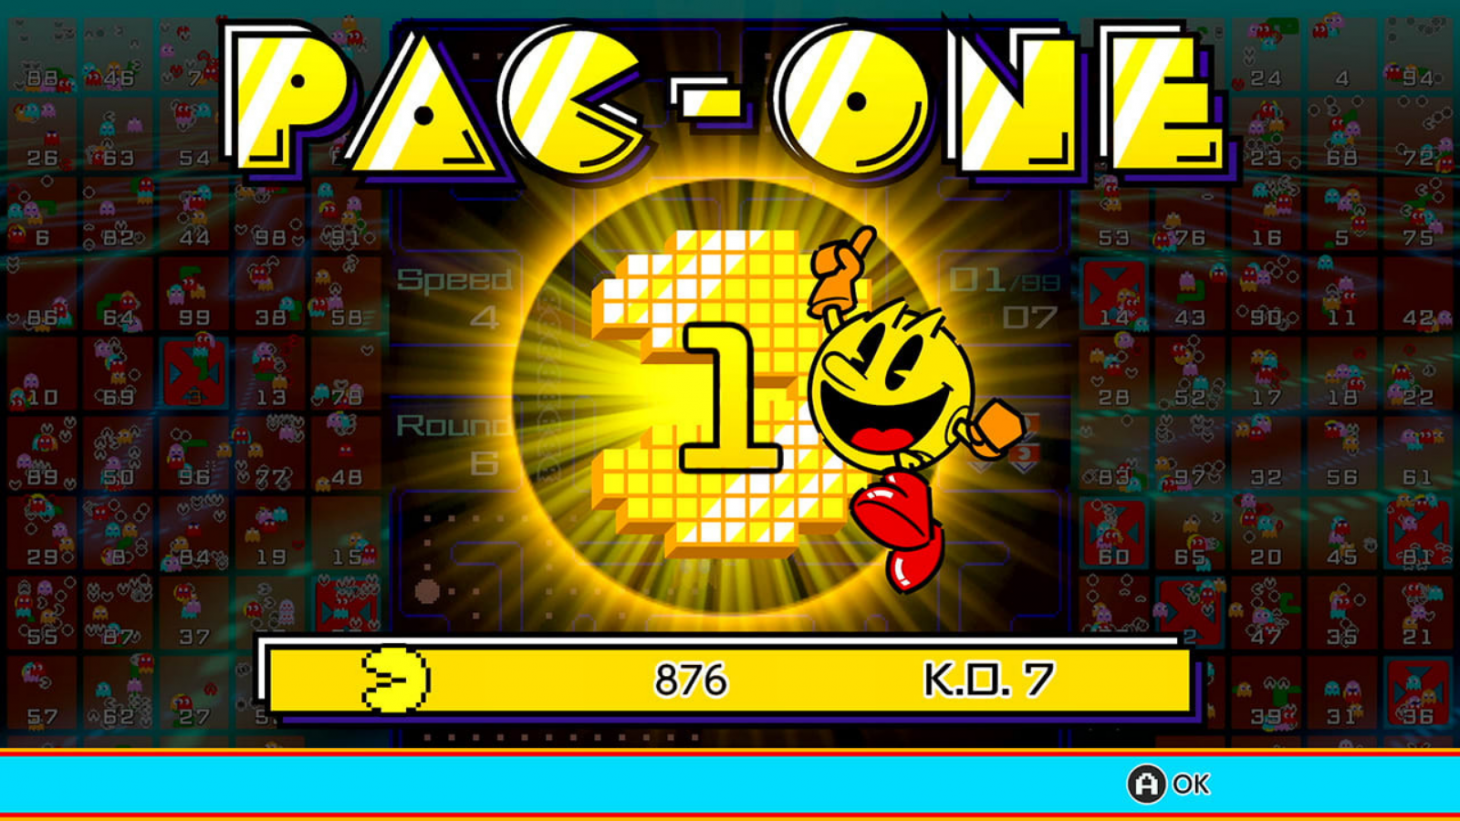 How to increase speed - PAC-MAN 99